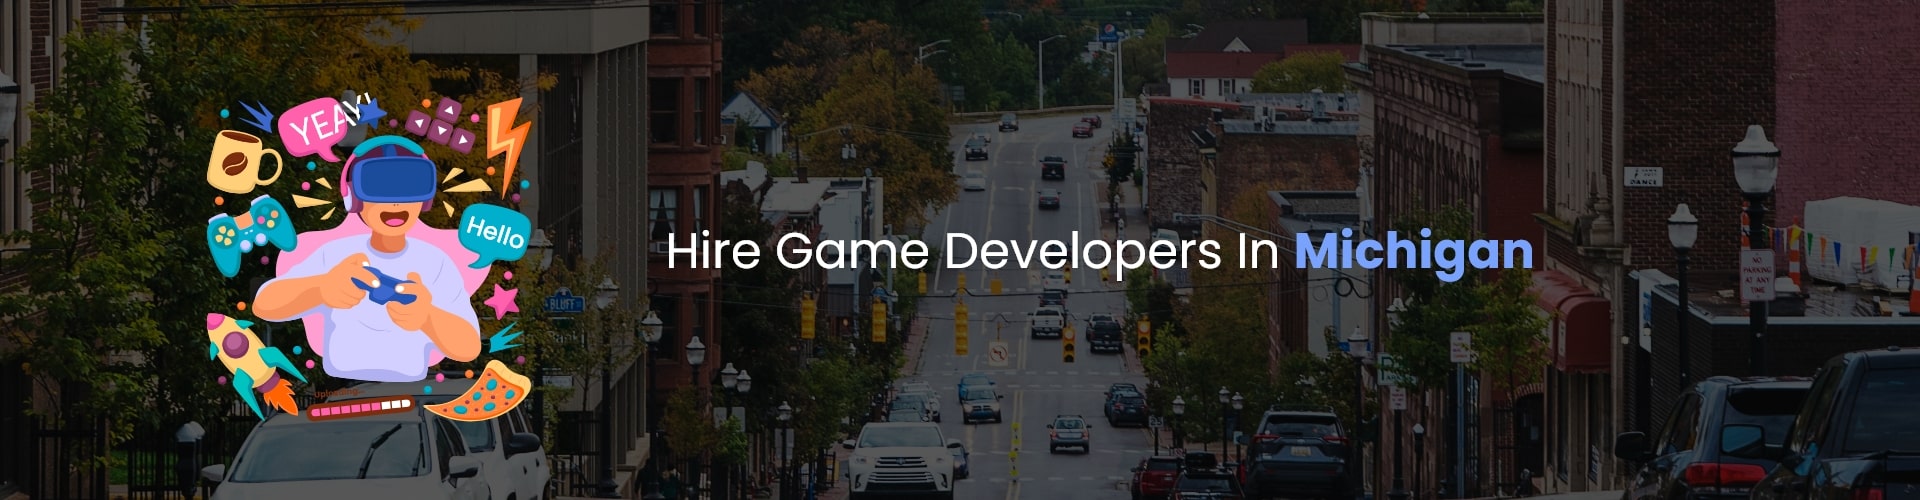 hire game developers in michigan